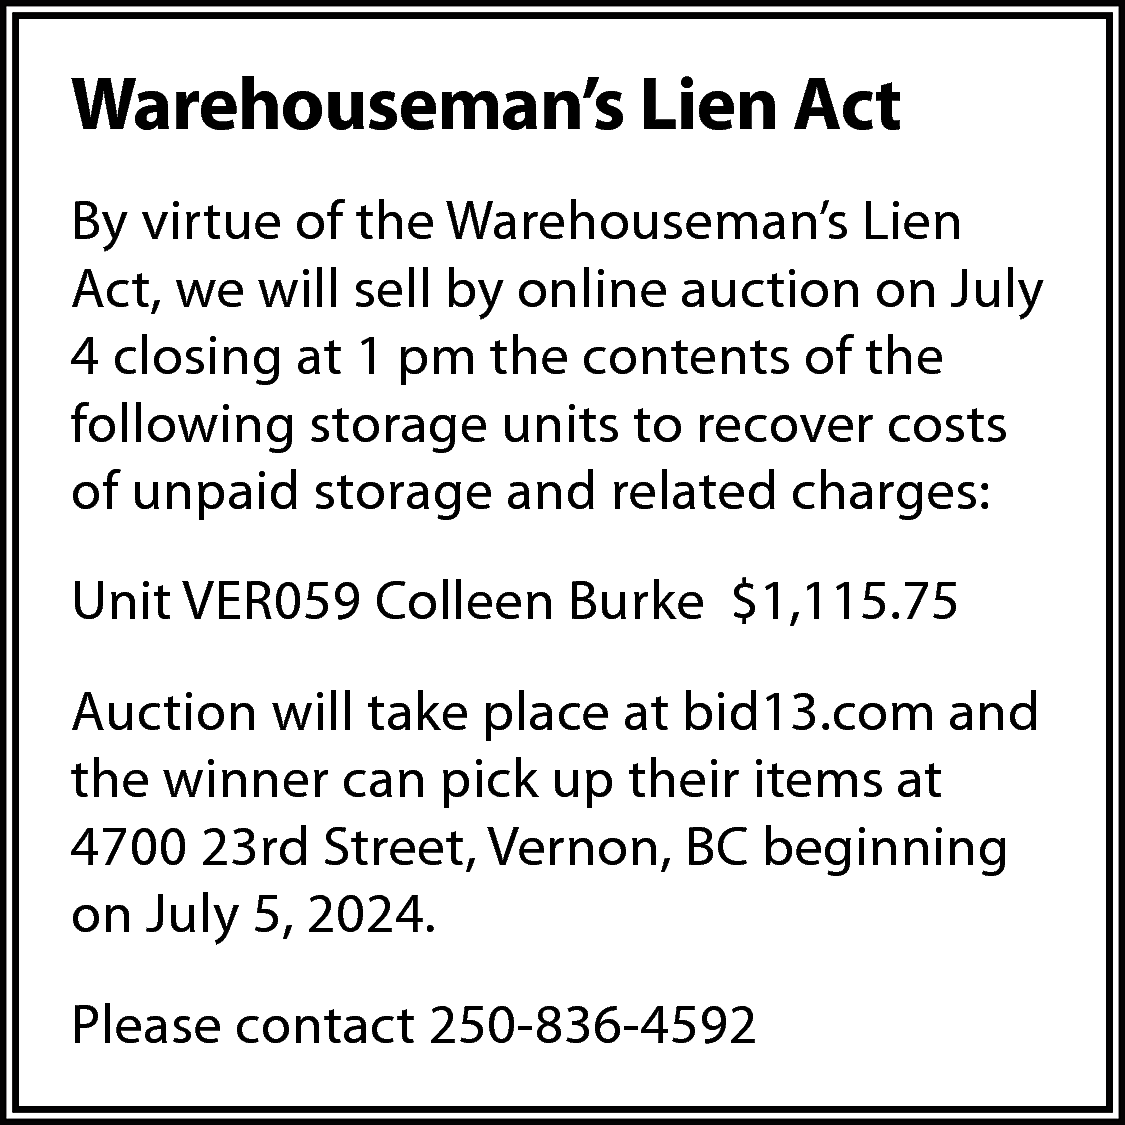 Warehouseman’s Lien Act <br>By virtue  Warehouseman’s Lien Act  By virtue of the Warehouseman’s Lien  Act, we will sell by online auction on July  4 closing at 1 pm the contents of the  following storage units to recover costs  of unpaid storage and related charges:  Unit VER059 Colleen Burke $1,115.75  Auction will take place at bid13.com and  the winner can pick up their items at  4700 23rd Street, Vernon, BC beginning  on July 5, 2024.  Please contact 250-836-4592    